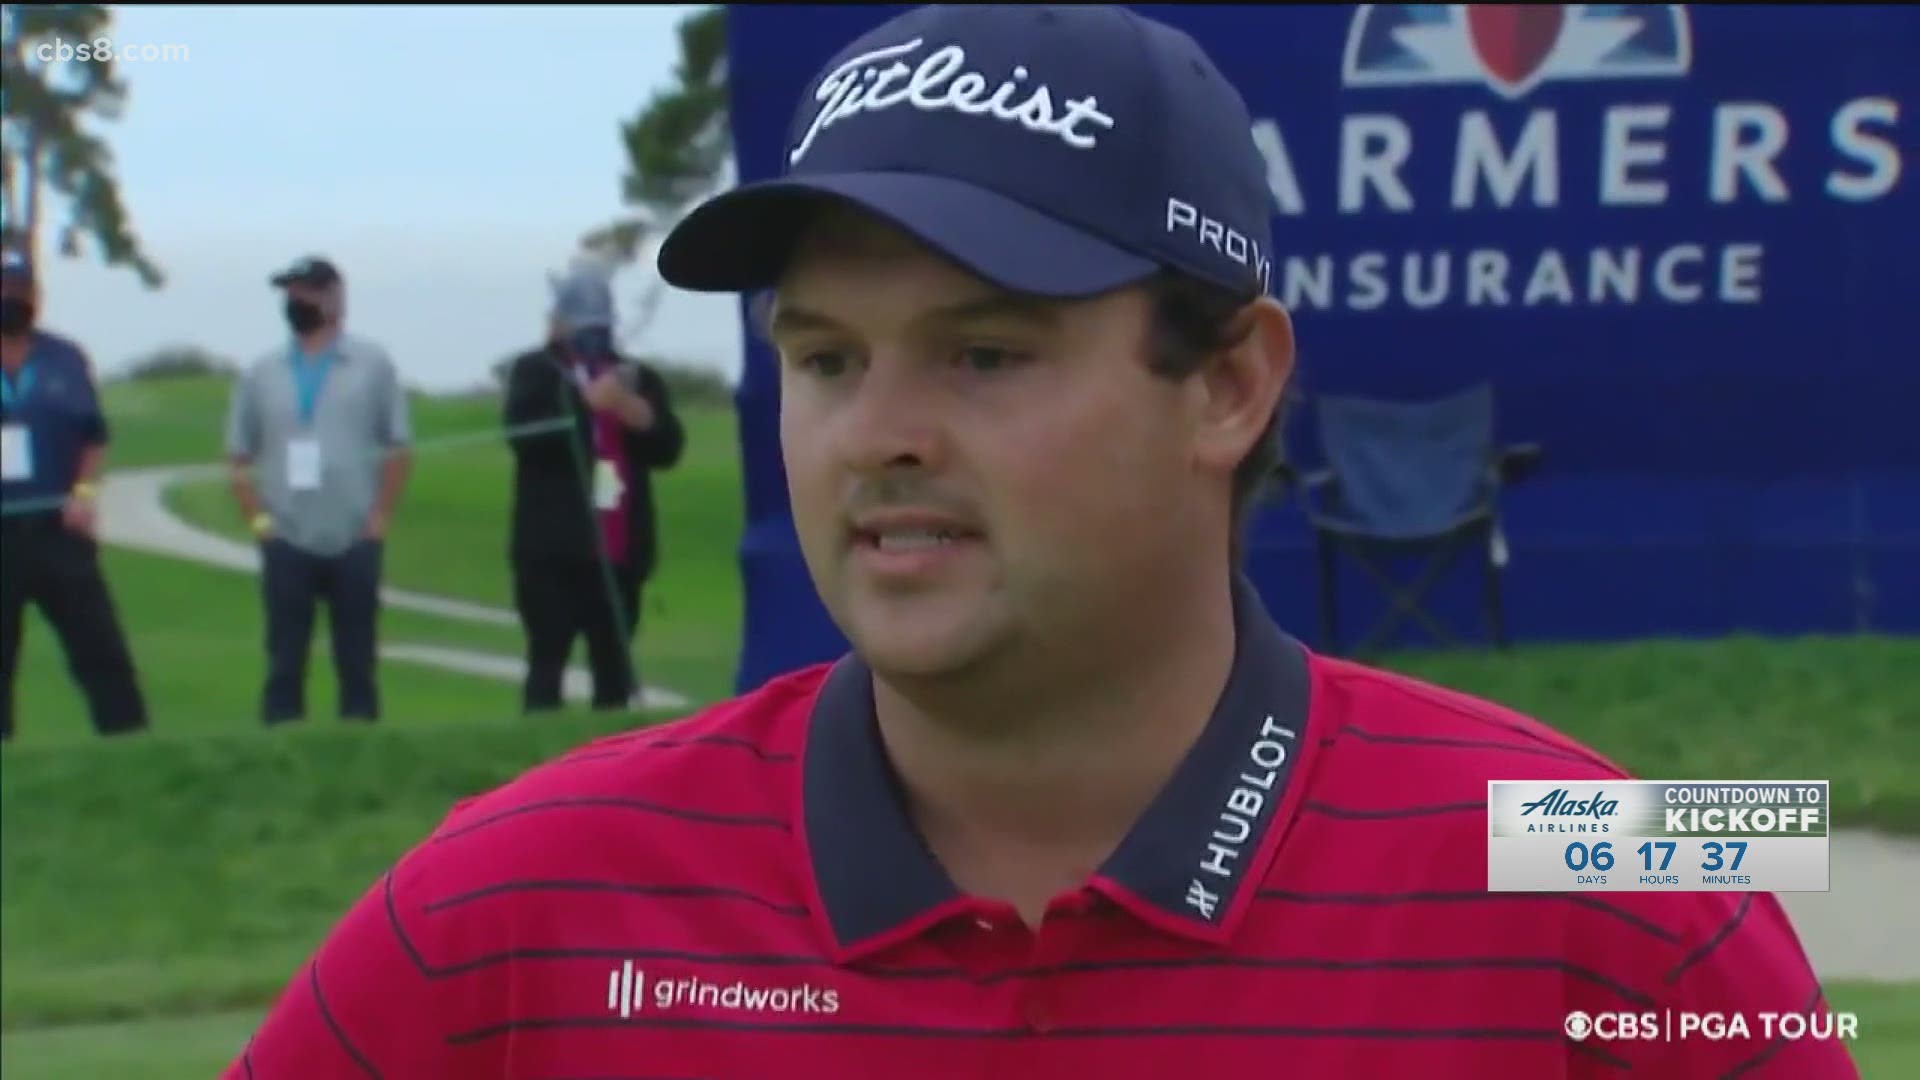 Patrick Reed closed with a 4-under 68 at Torrey Pines, making an eagle on the par-5 sixth and finishing off his ninth PGA Tour title with a birdie on the 18th.